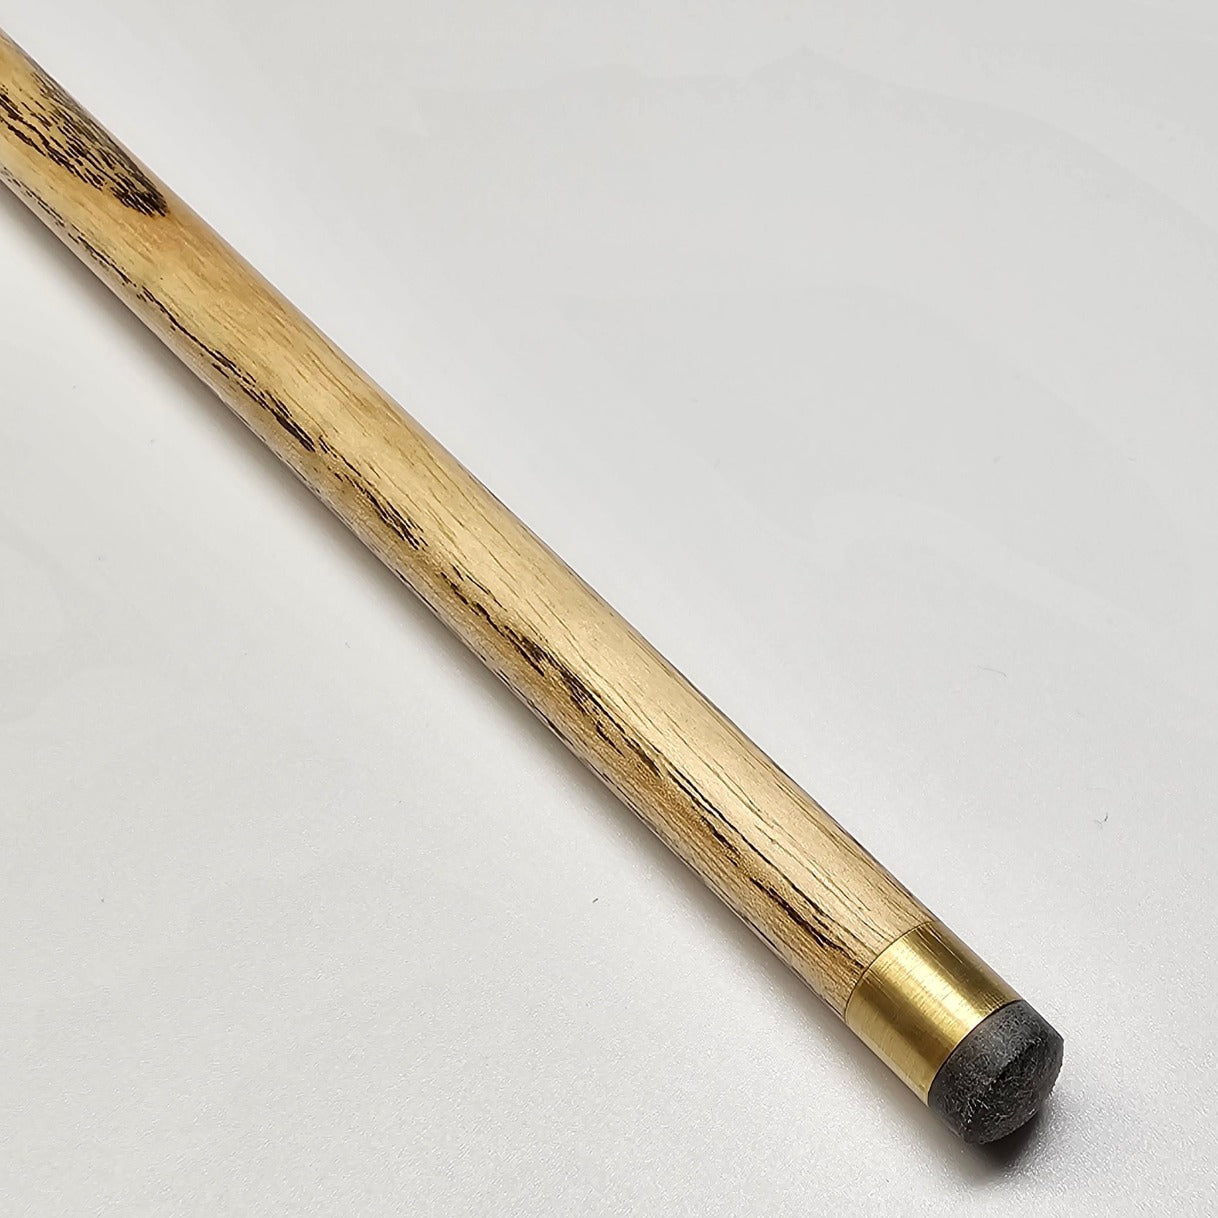 Asia Cues Support - One Piece Snooker Cue  Handmade Ebony Butt. Shaft View